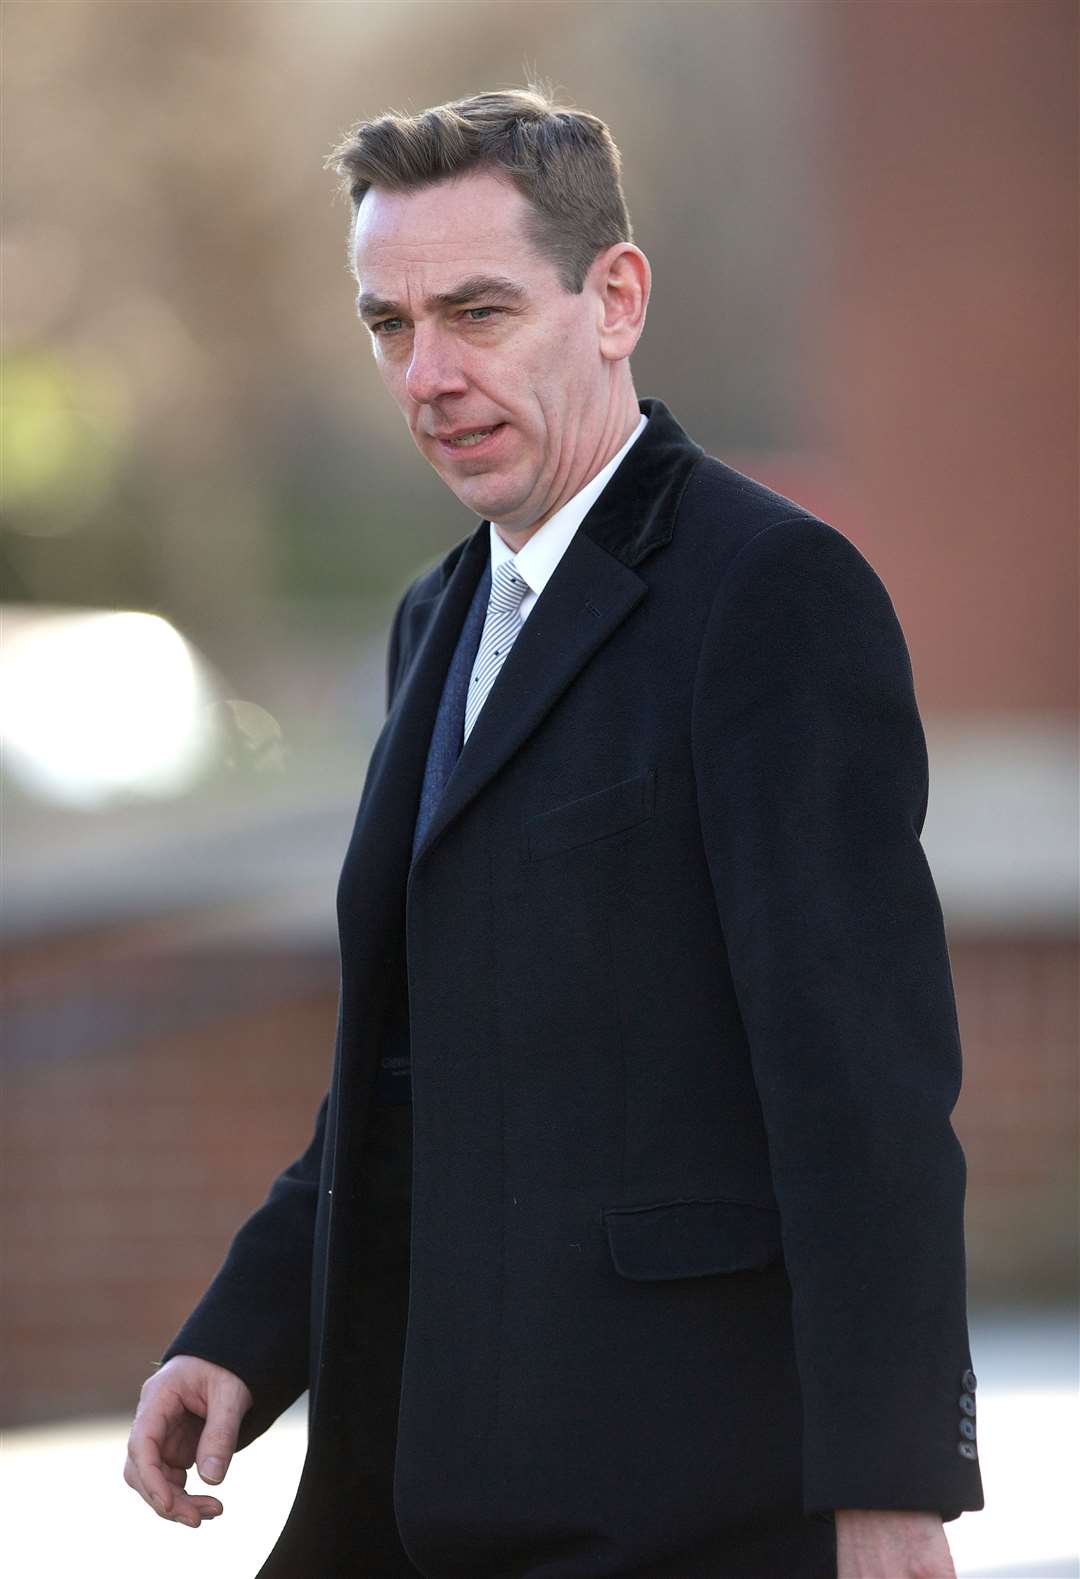 Ryan Tubridy (PA/Damien Eagers)